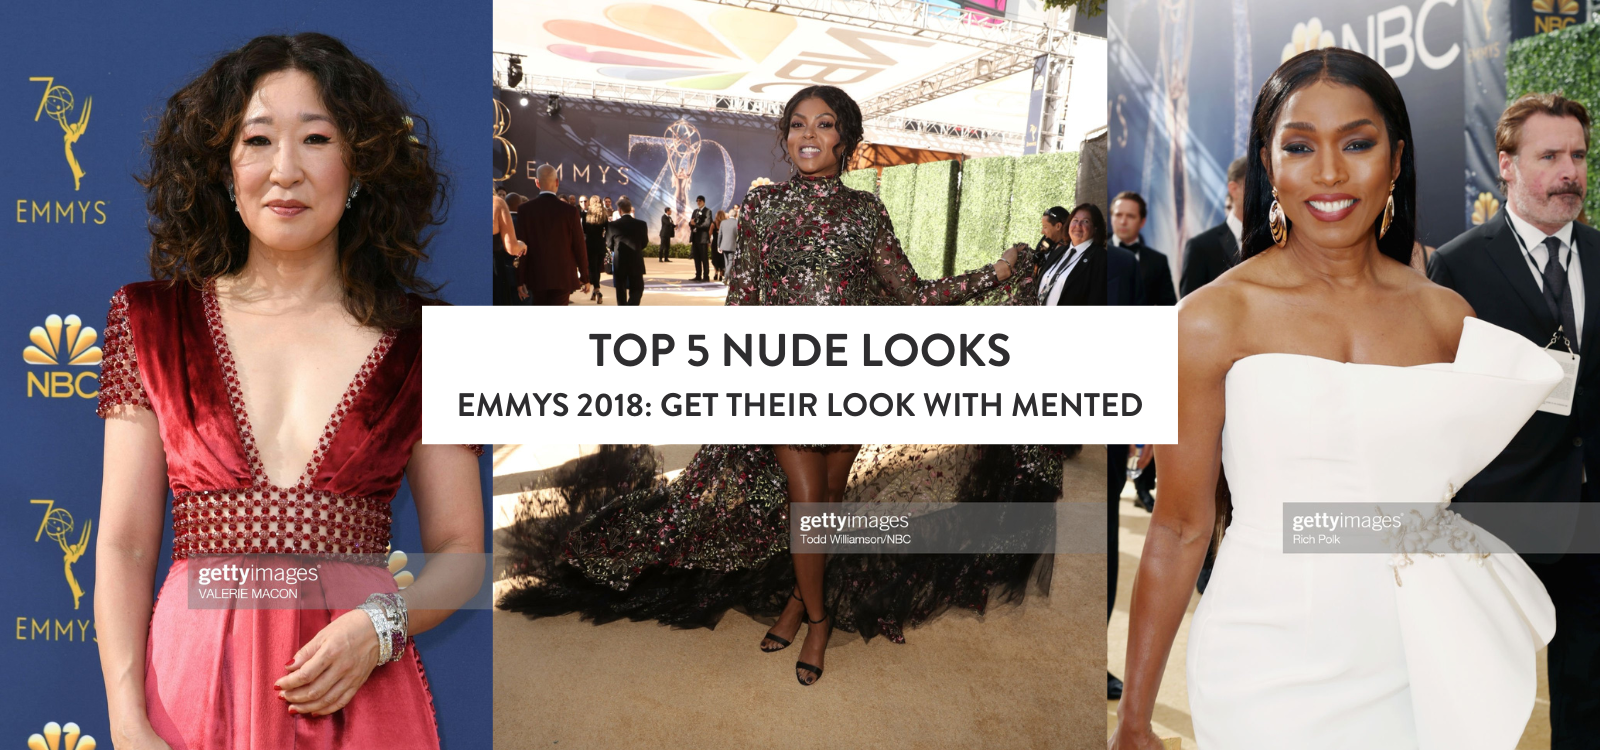 Top 5 Nude Looks: Emmys 2018